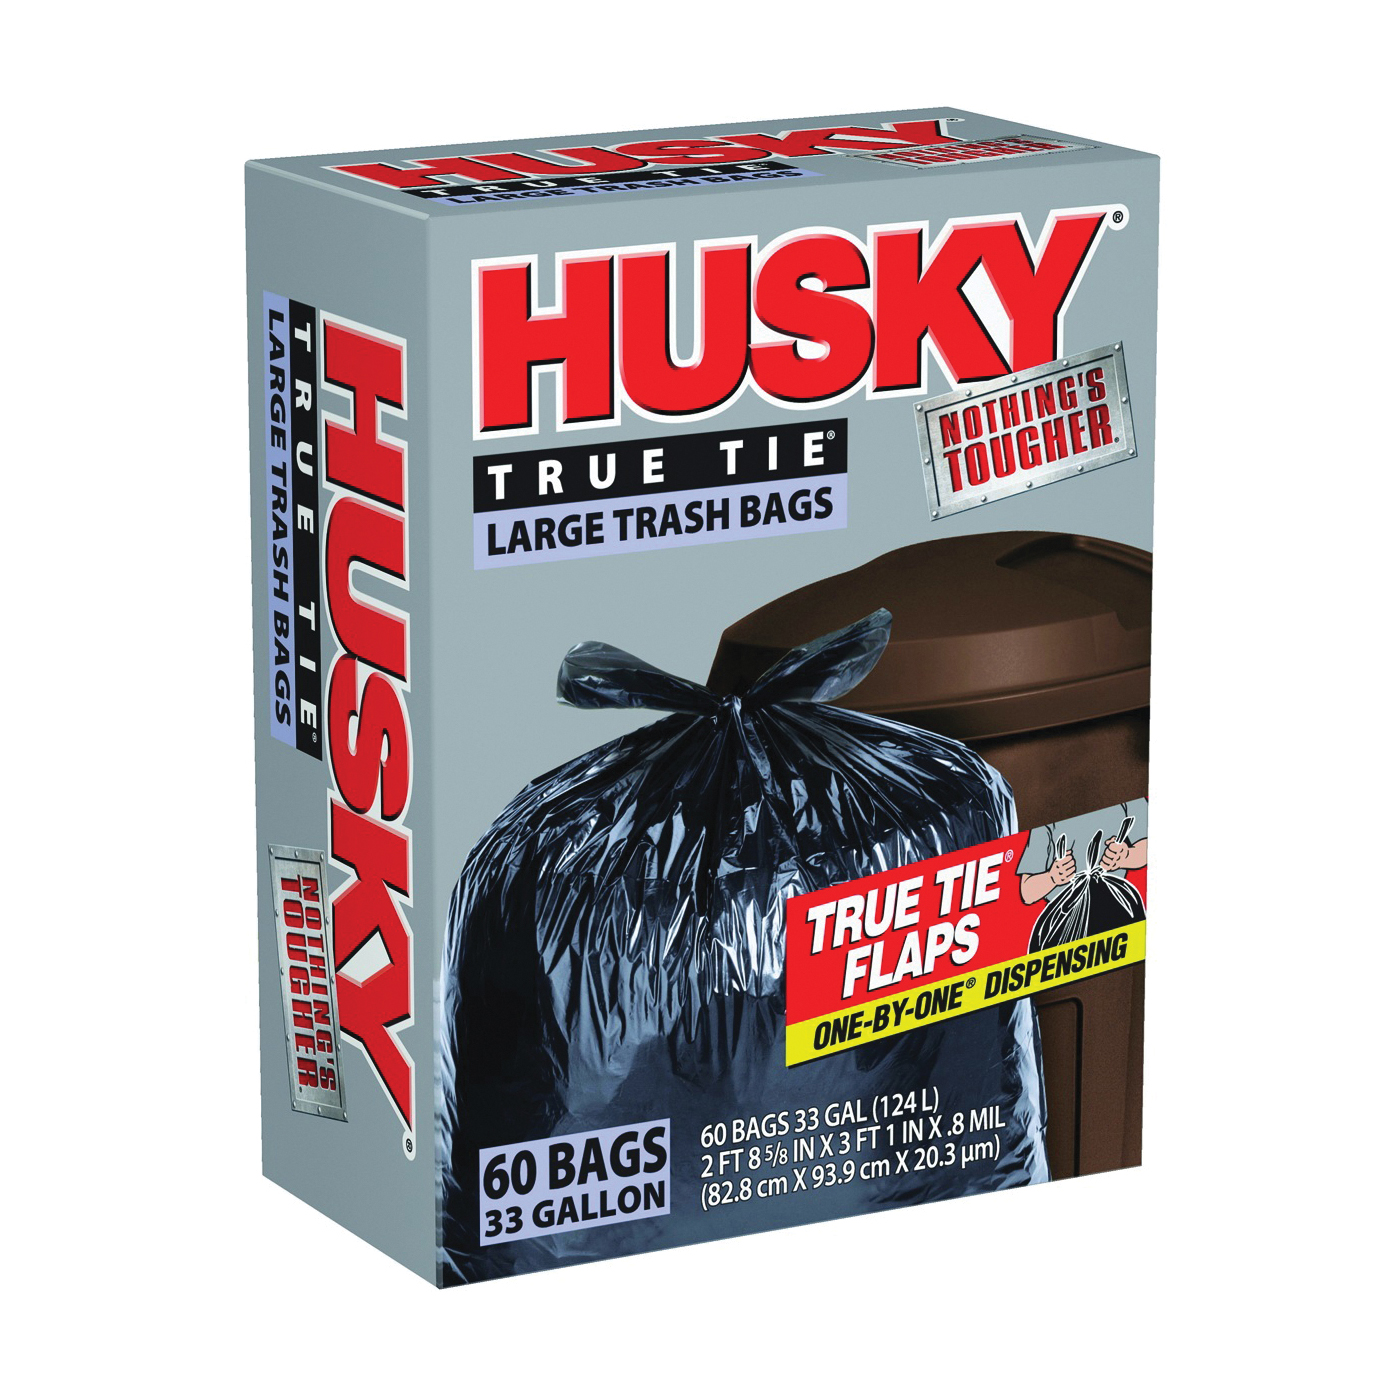 Husky Hk18xds050w Trash Compactor Bags, White, 18 Gallon (Pack of 3)